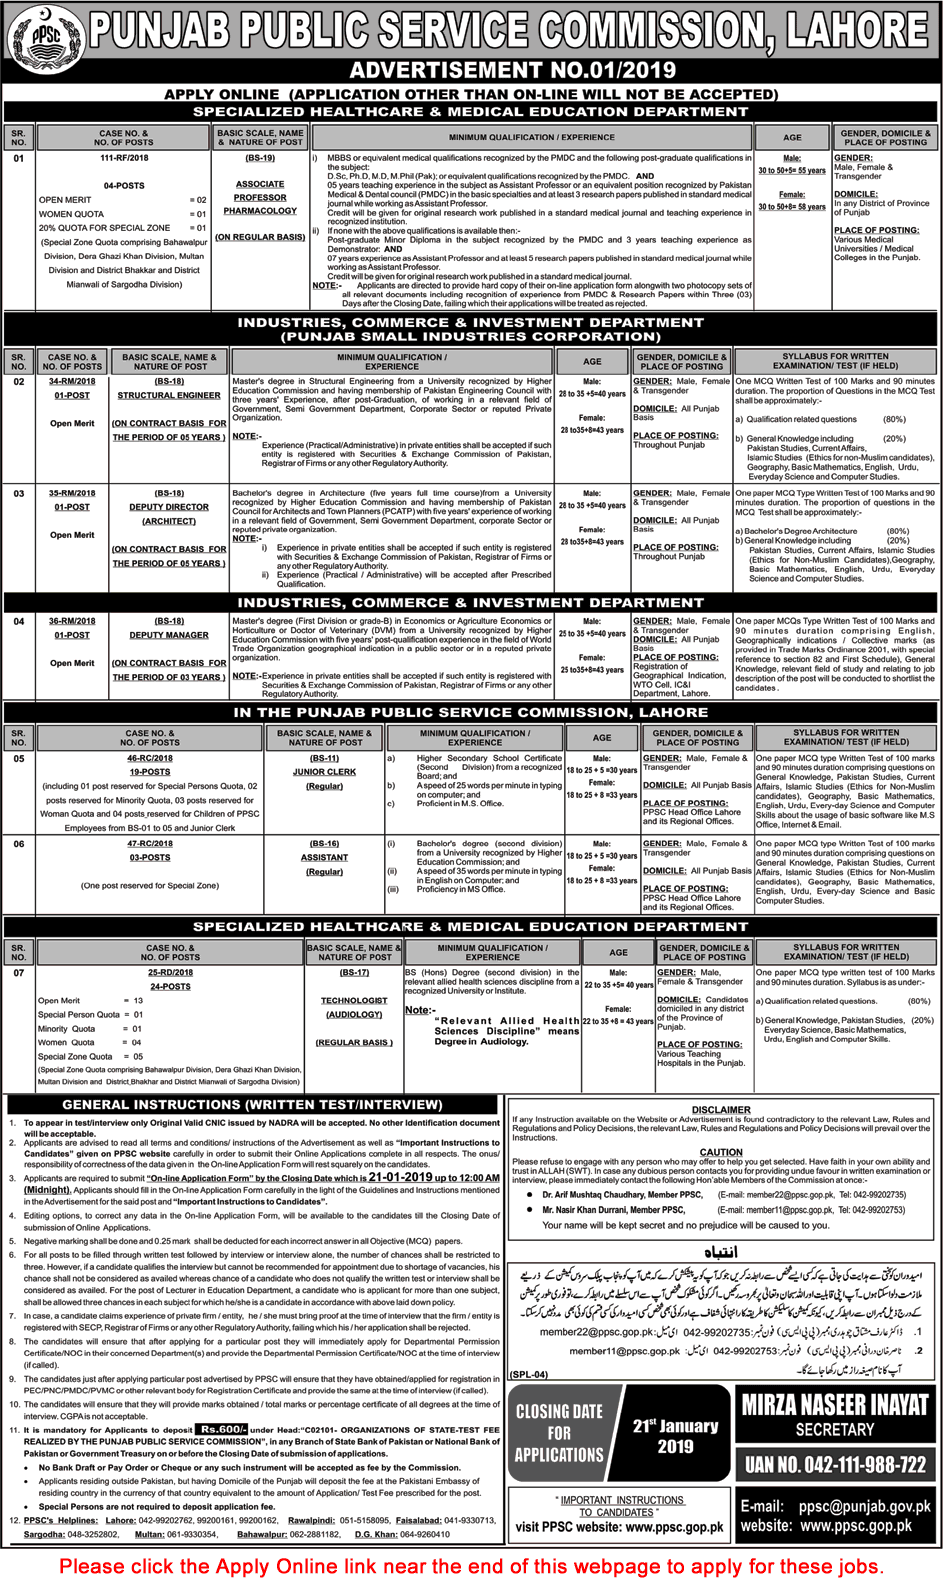 PPSC Jobs 2019 Apply Online Consolidated Advertisement No 01/2019 1/2019 Latest